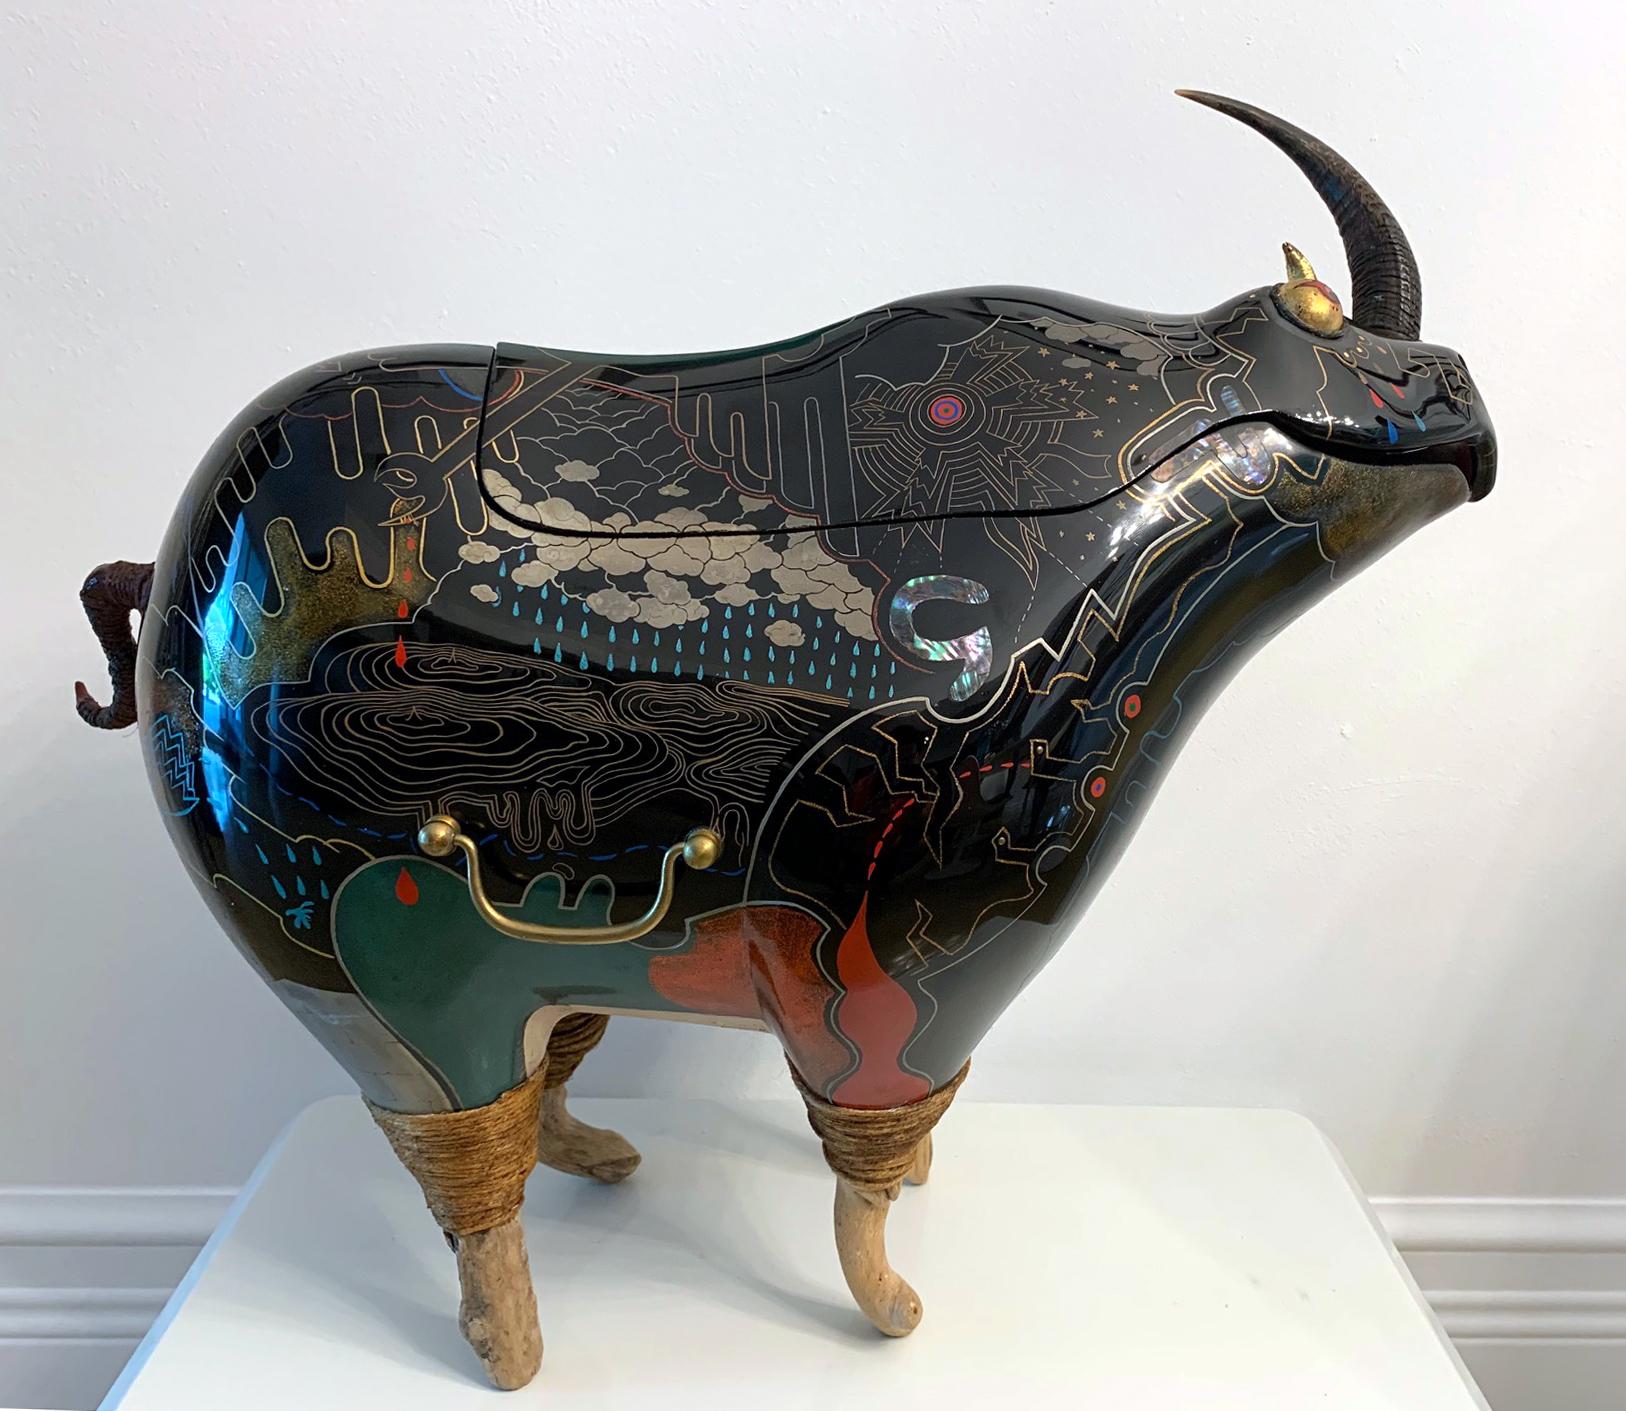 Japanese Lacquer Rhino Sculpture by Someya Satoshi (1983-). A hand-molded lacquer sculpture that depicts a fantasy beast 